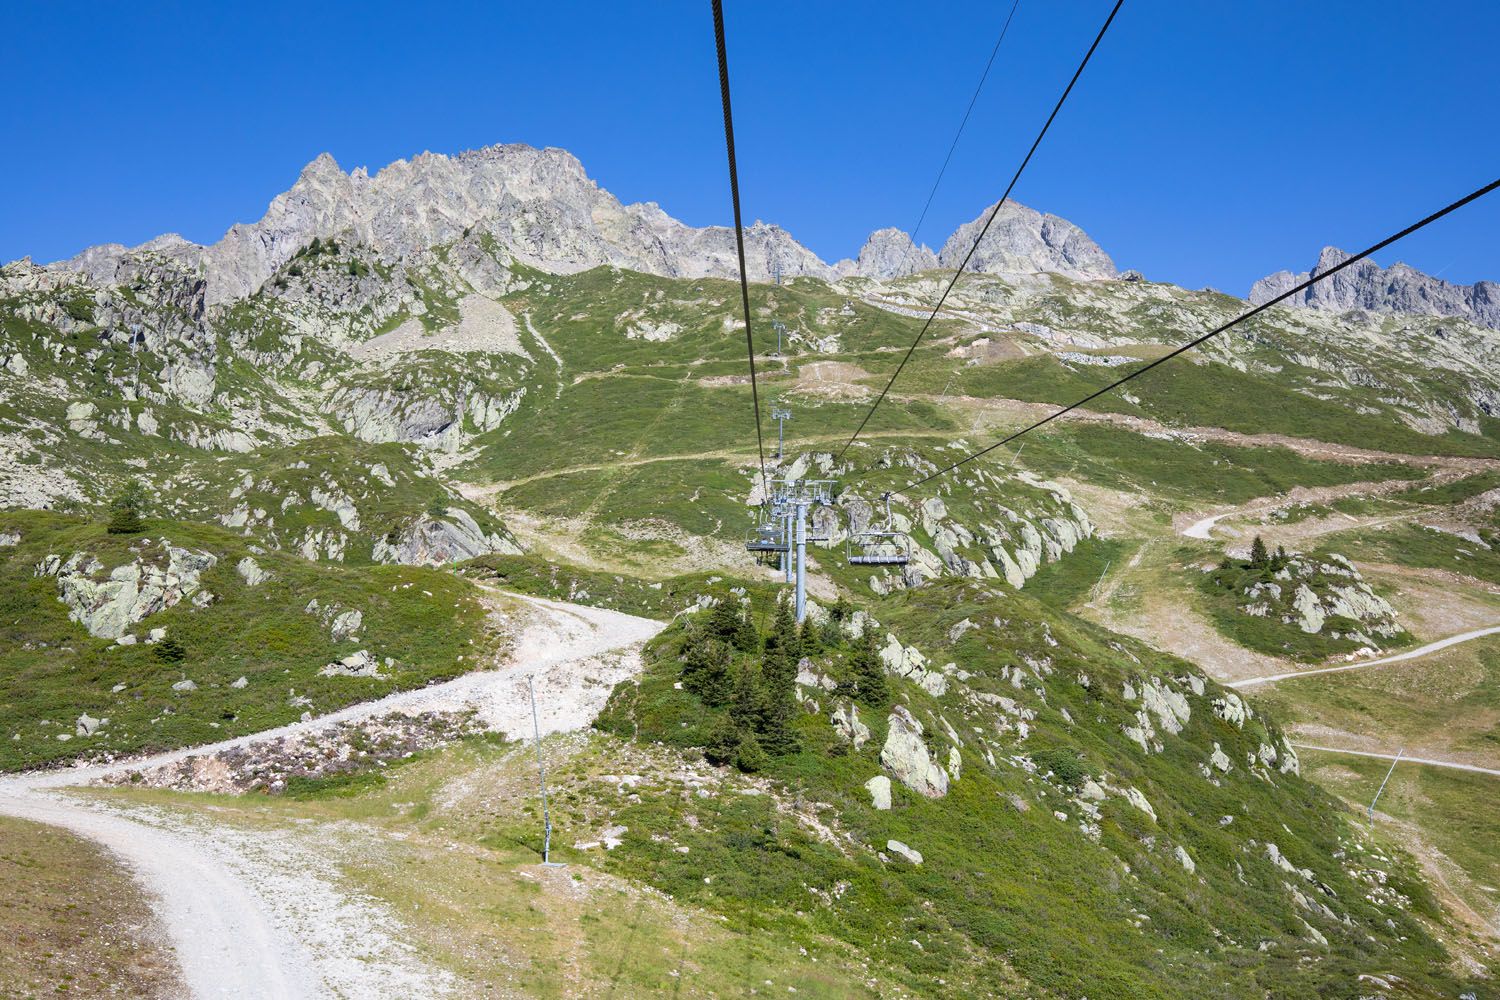 LIndex Chairlift